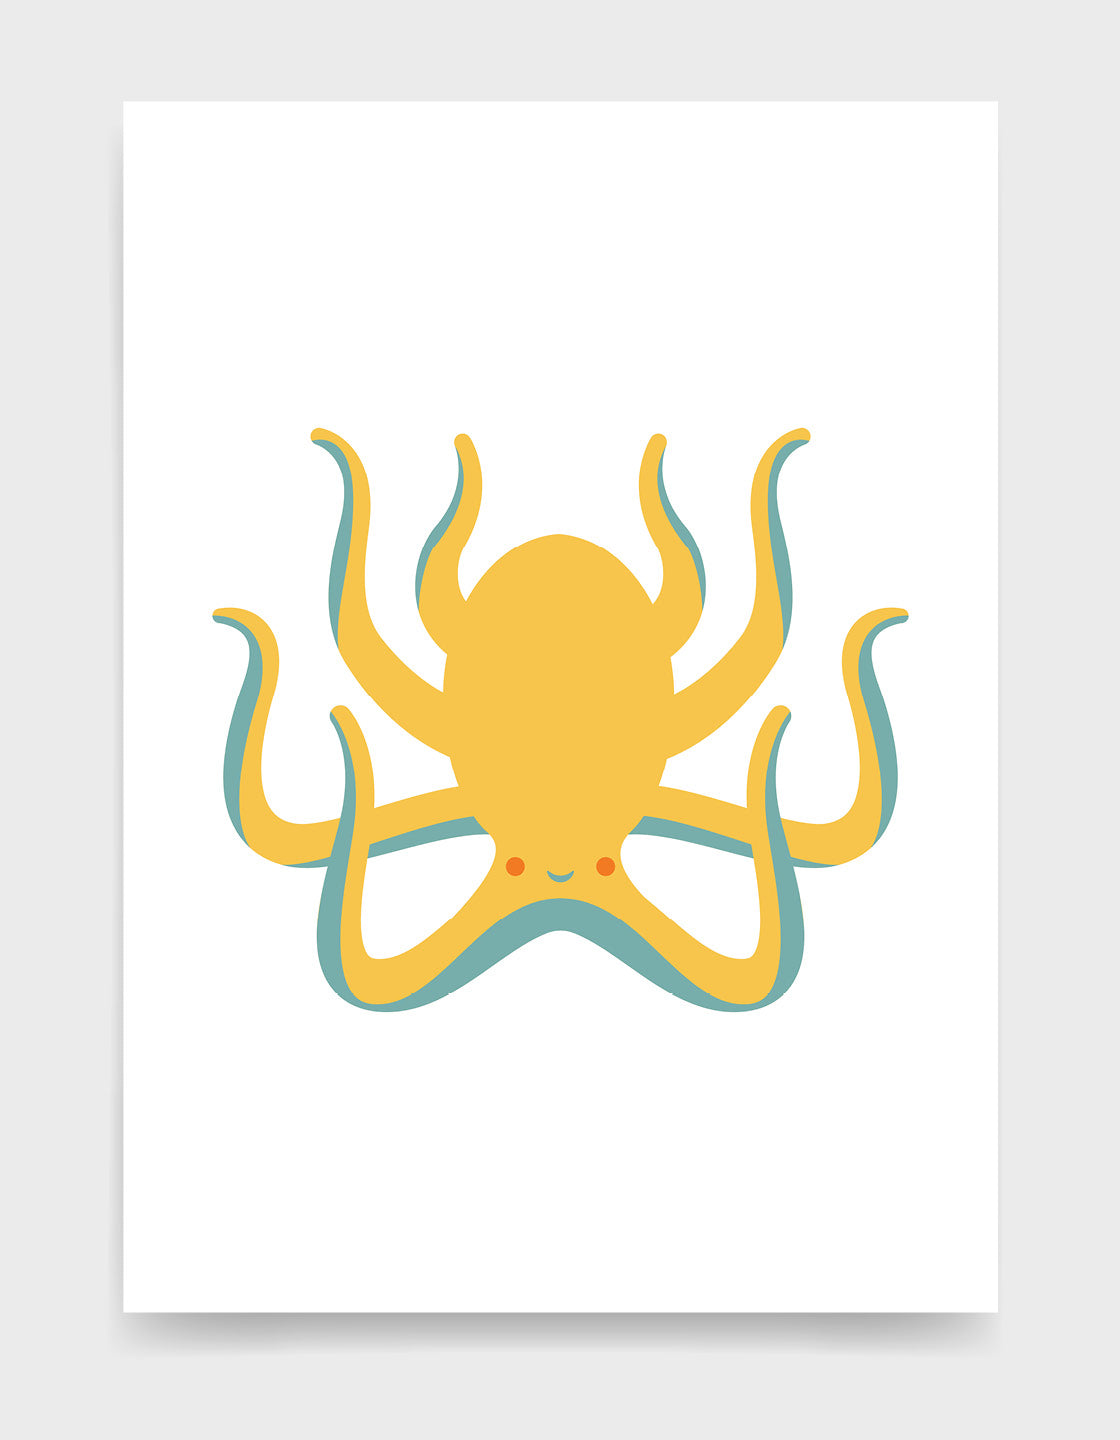 Kids octopus art print depicts a cute yellow octopus with a smiling face and blue underneath against a white background